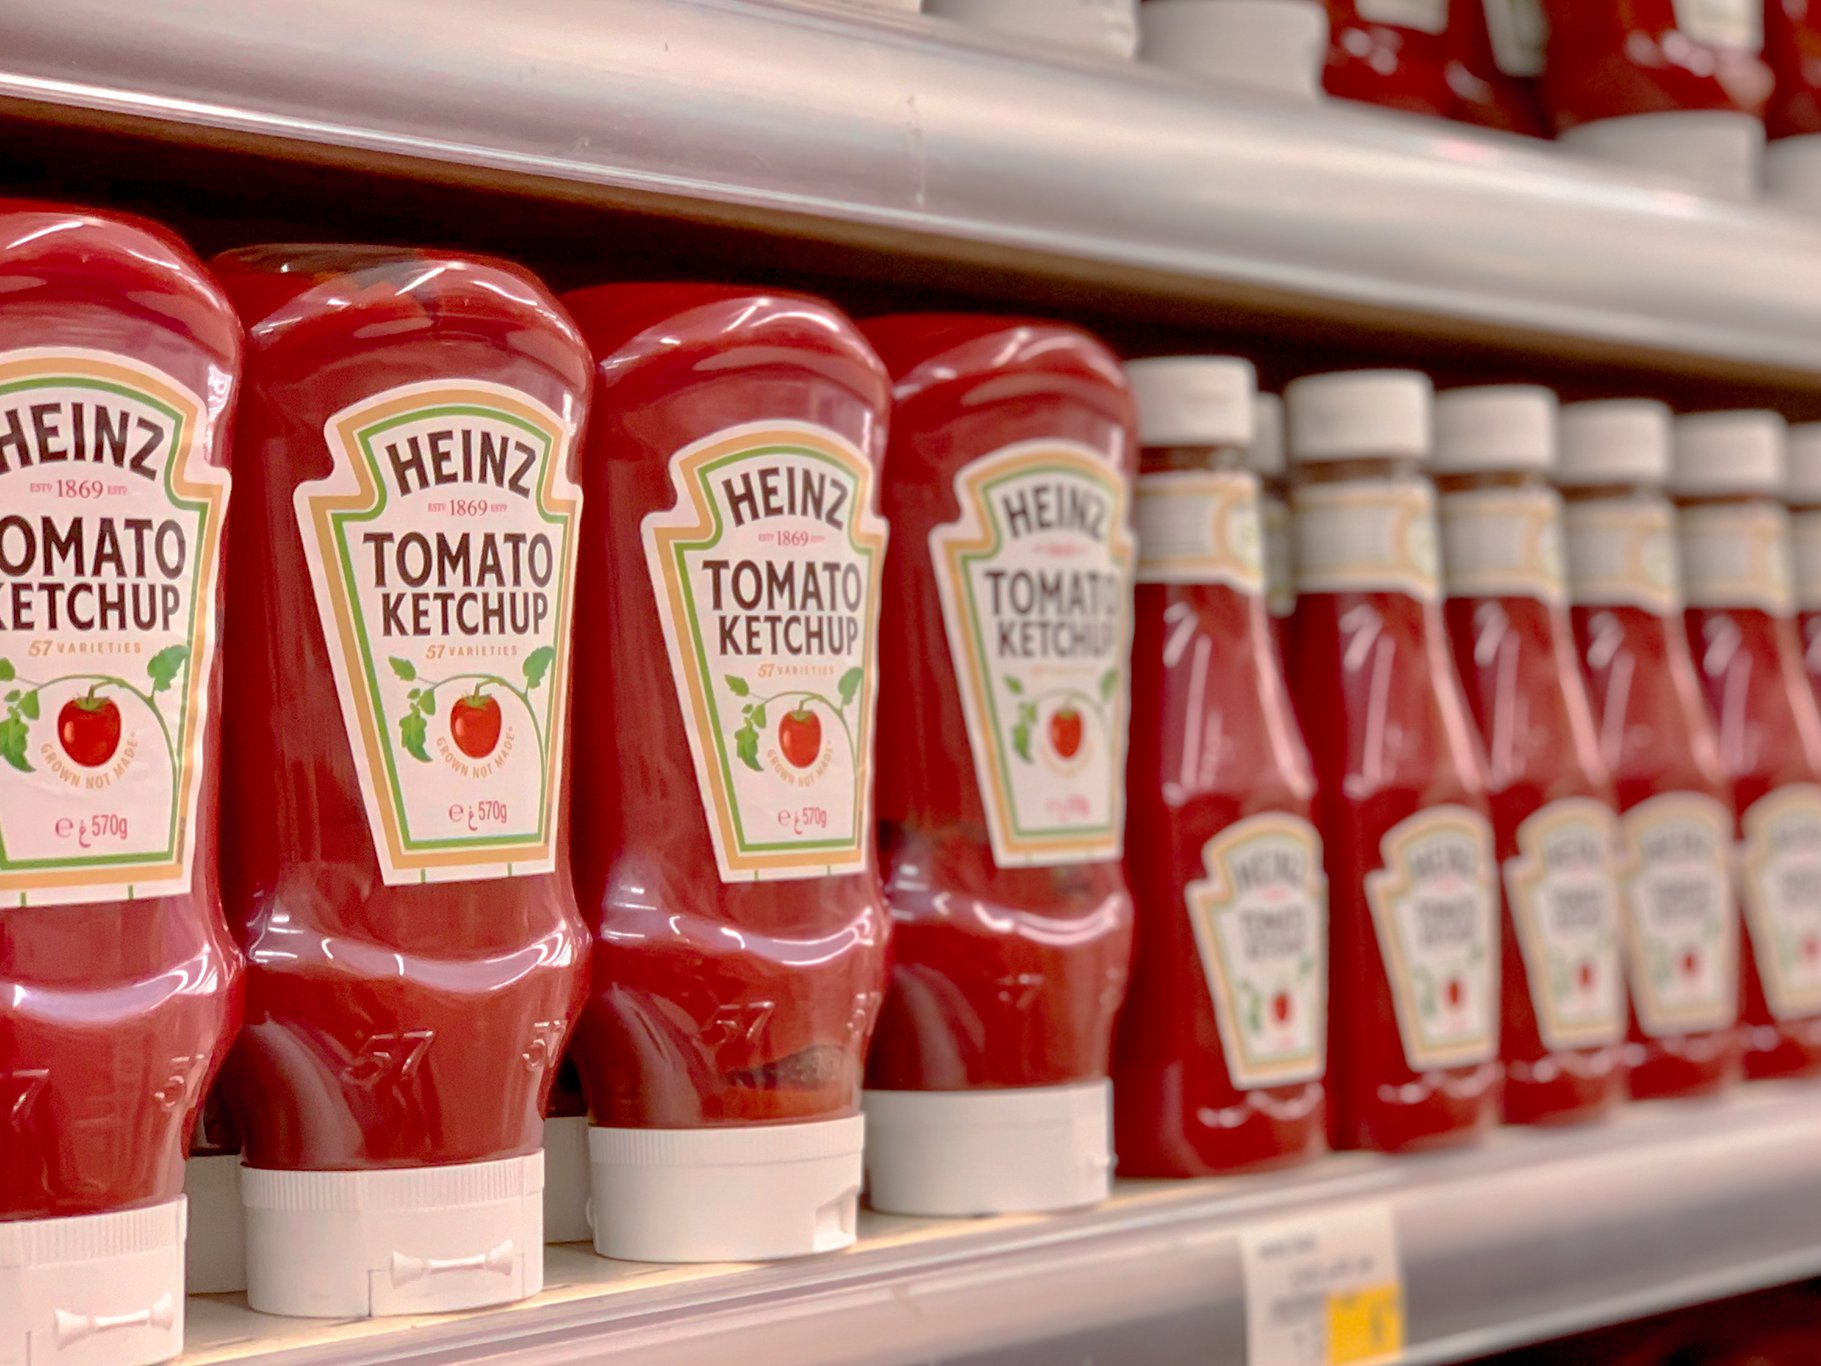 Heinz Tomato Ketchup saw the biggest average percentage increase in UK supermarkets.